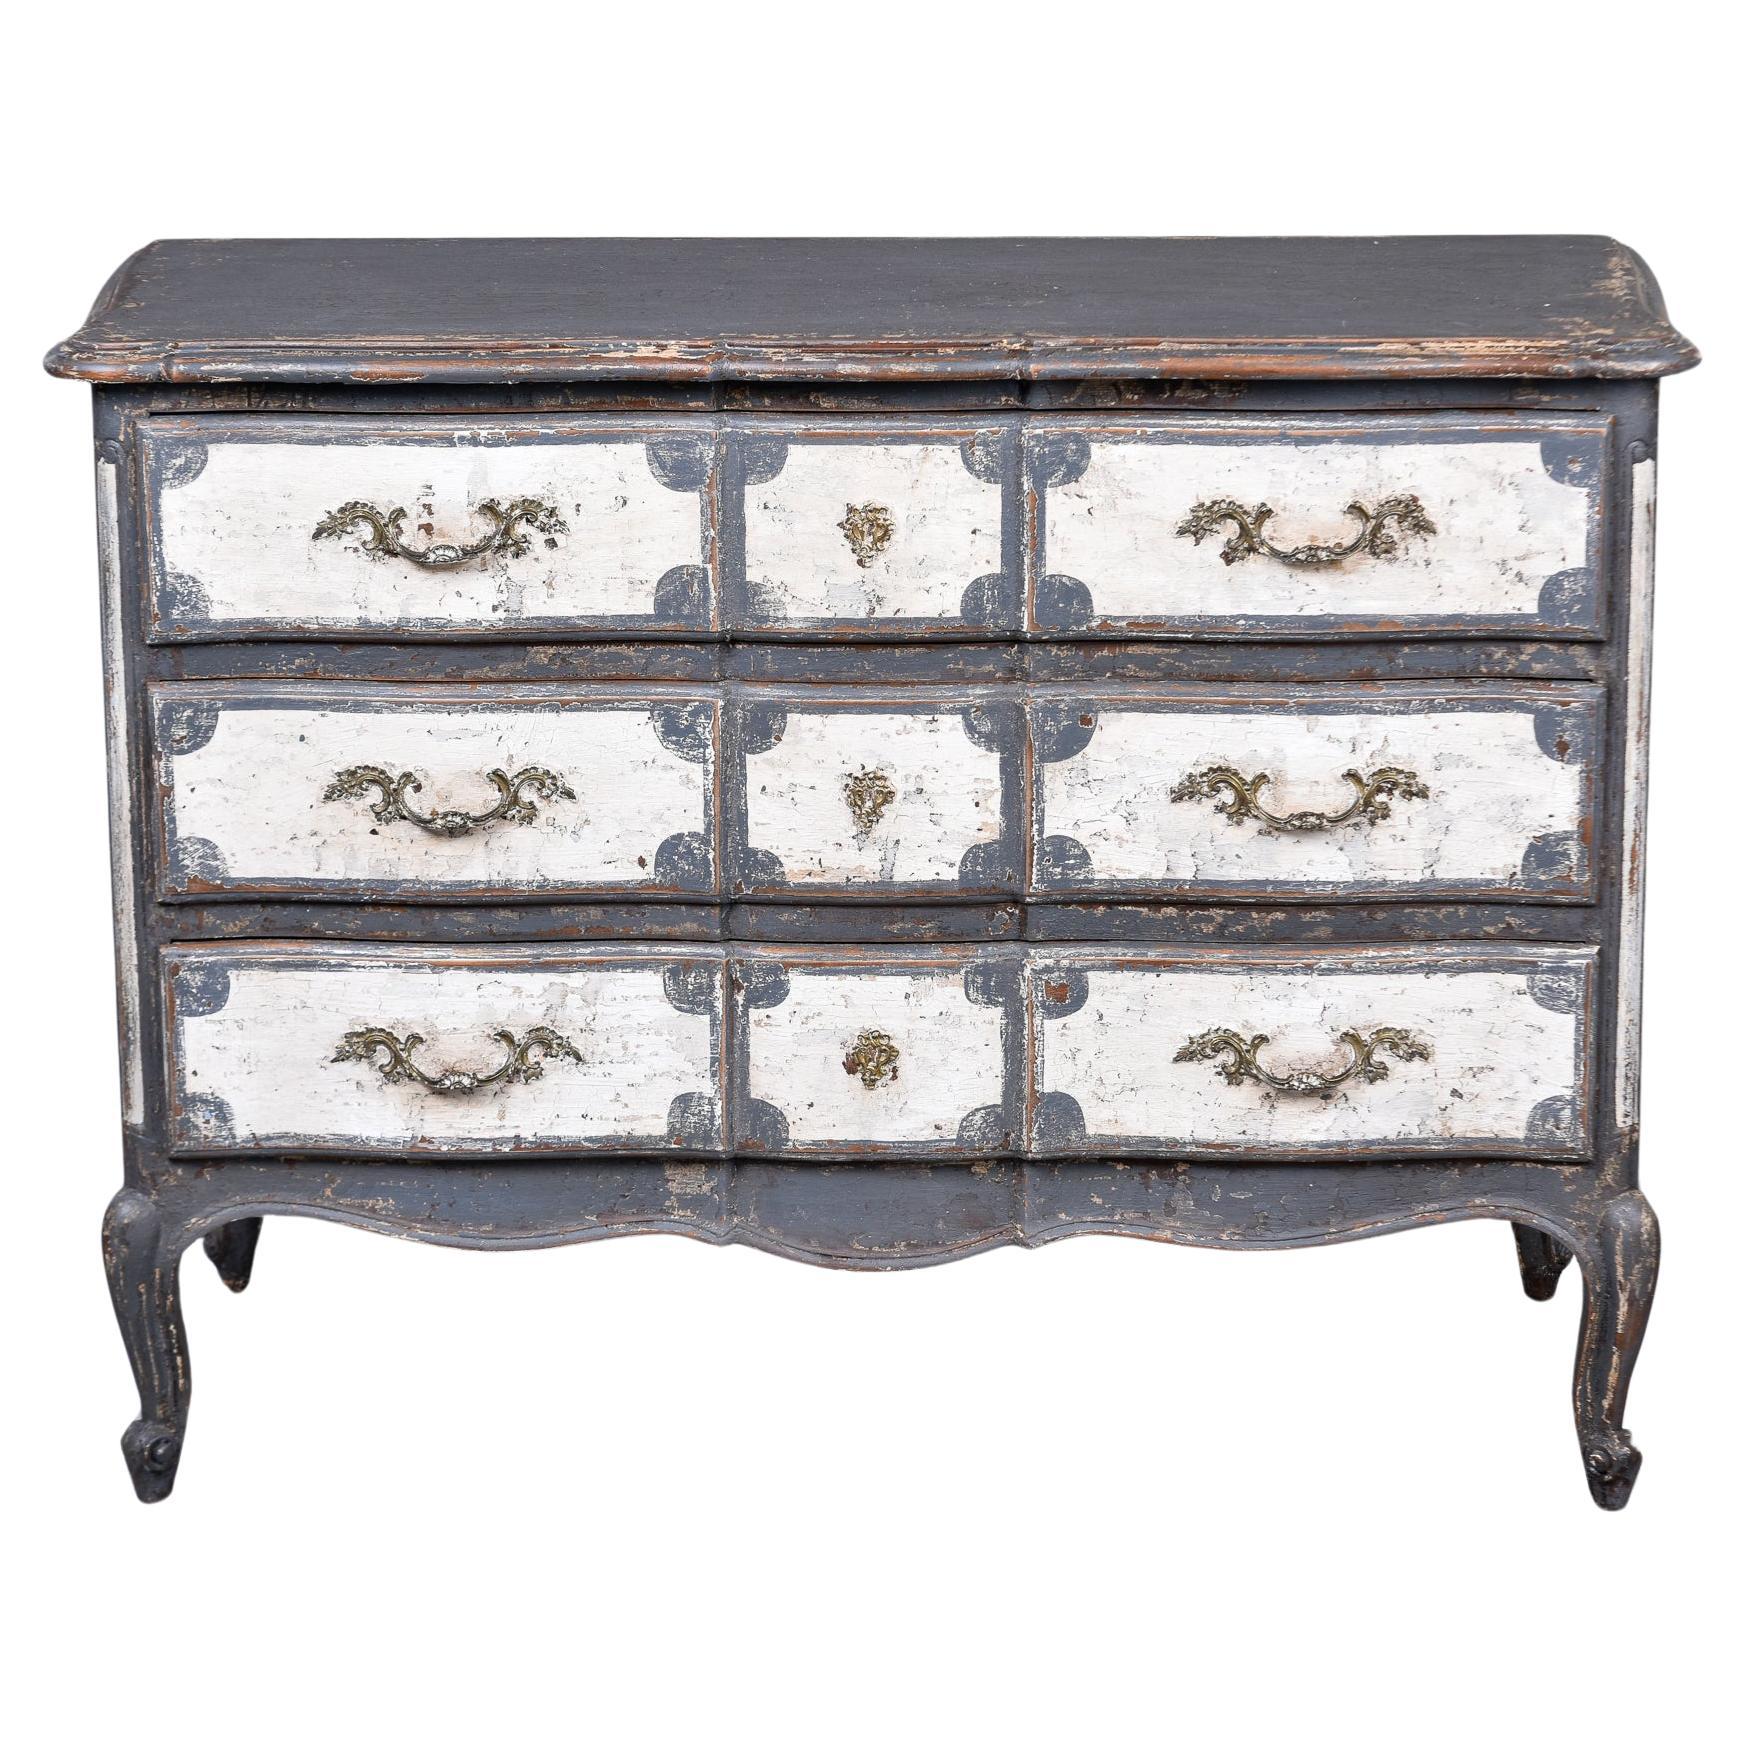 Early 20th C Painted French Three Drawer Chest For Sale